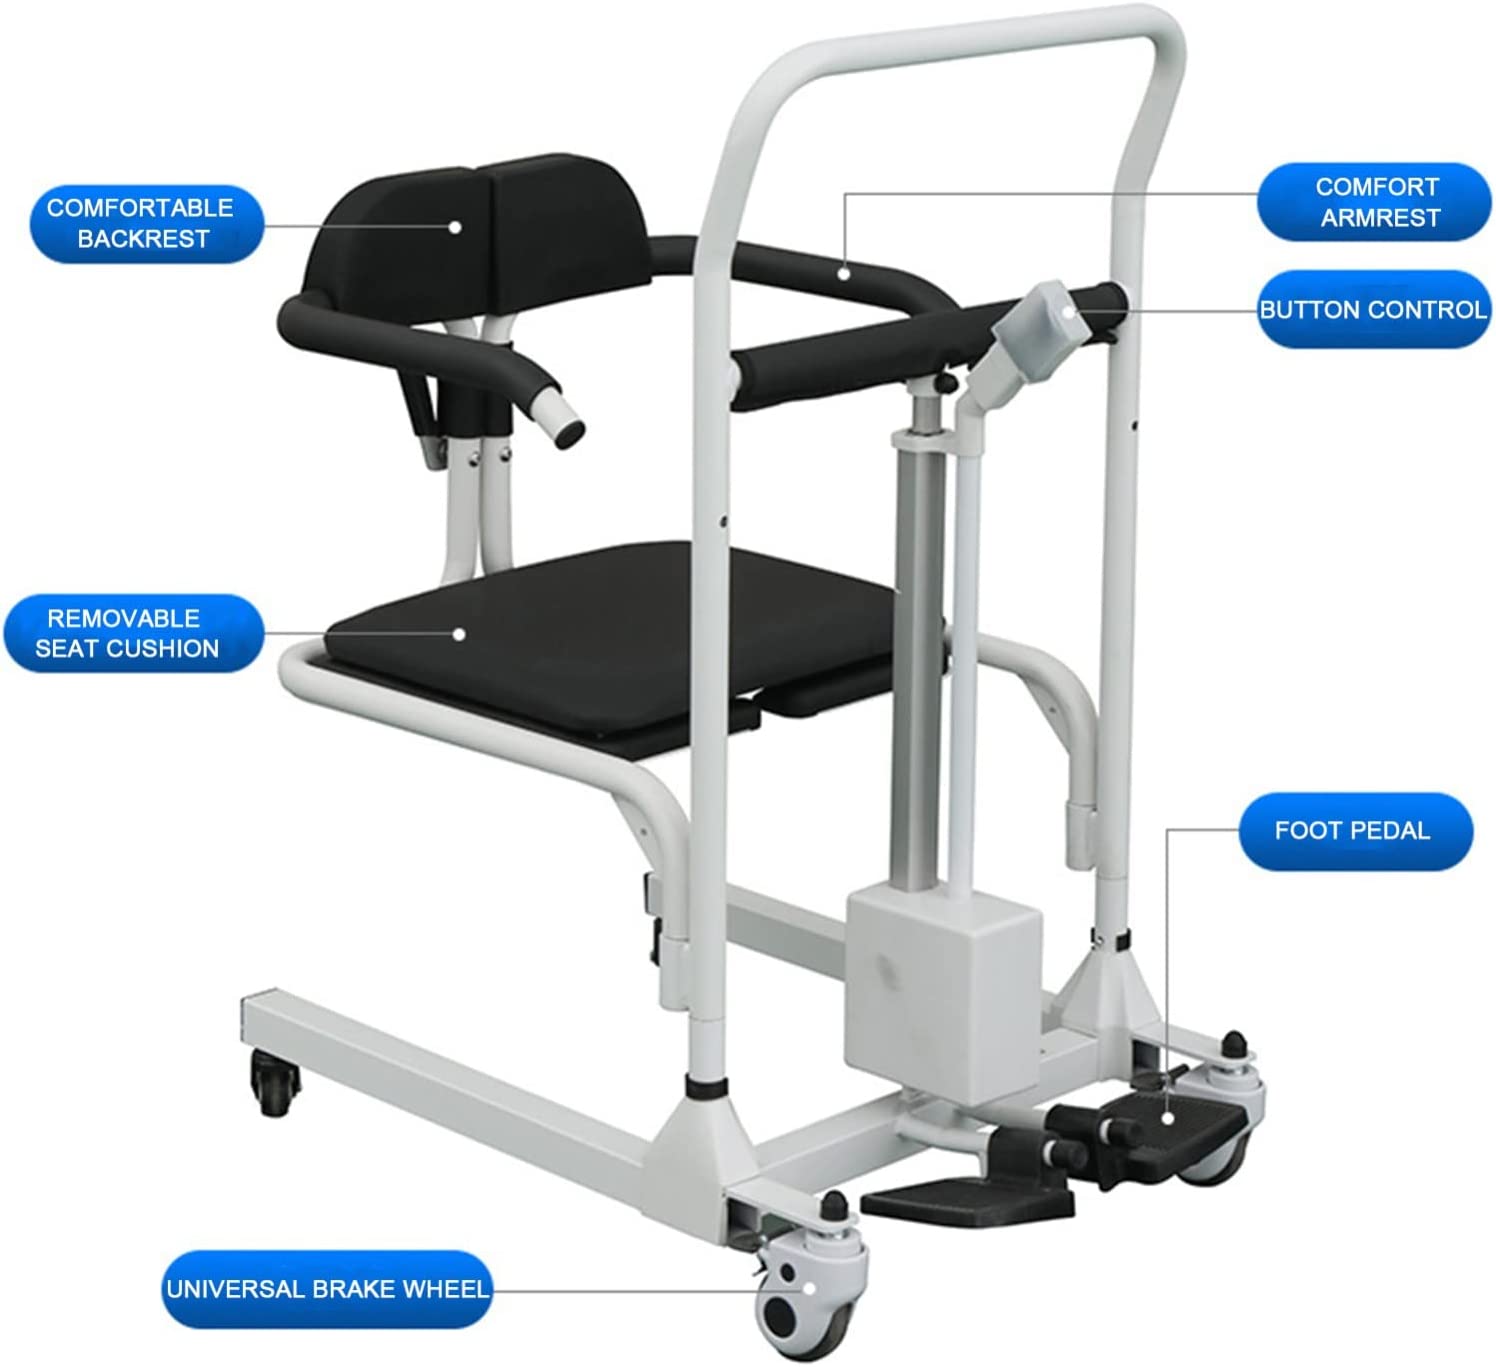 Electric transfer lift chair makes it easier to take care of bedridden people